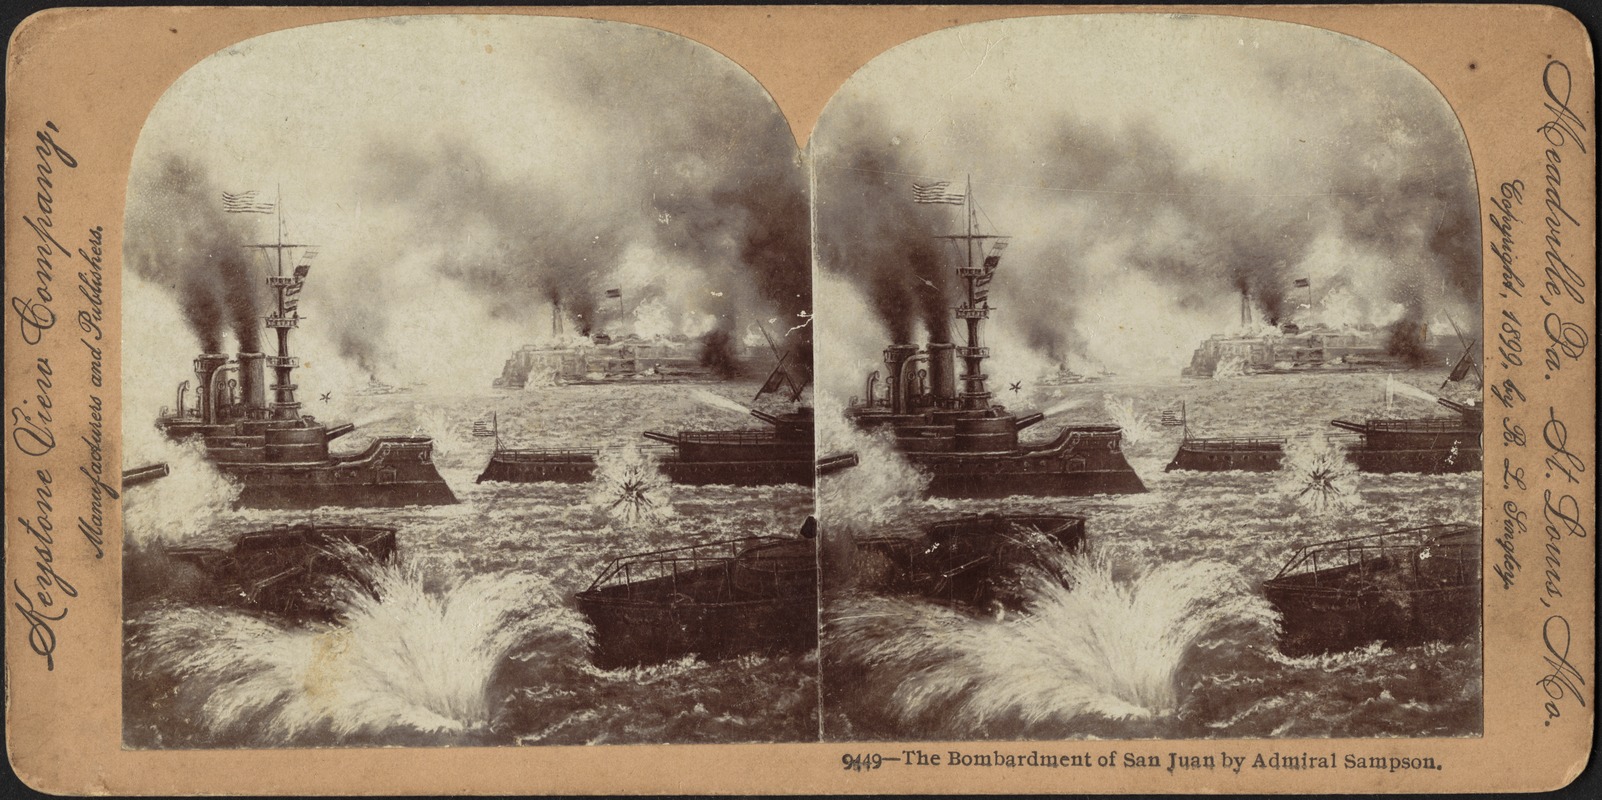 The bombardment of San Juan by Admiral Sampson